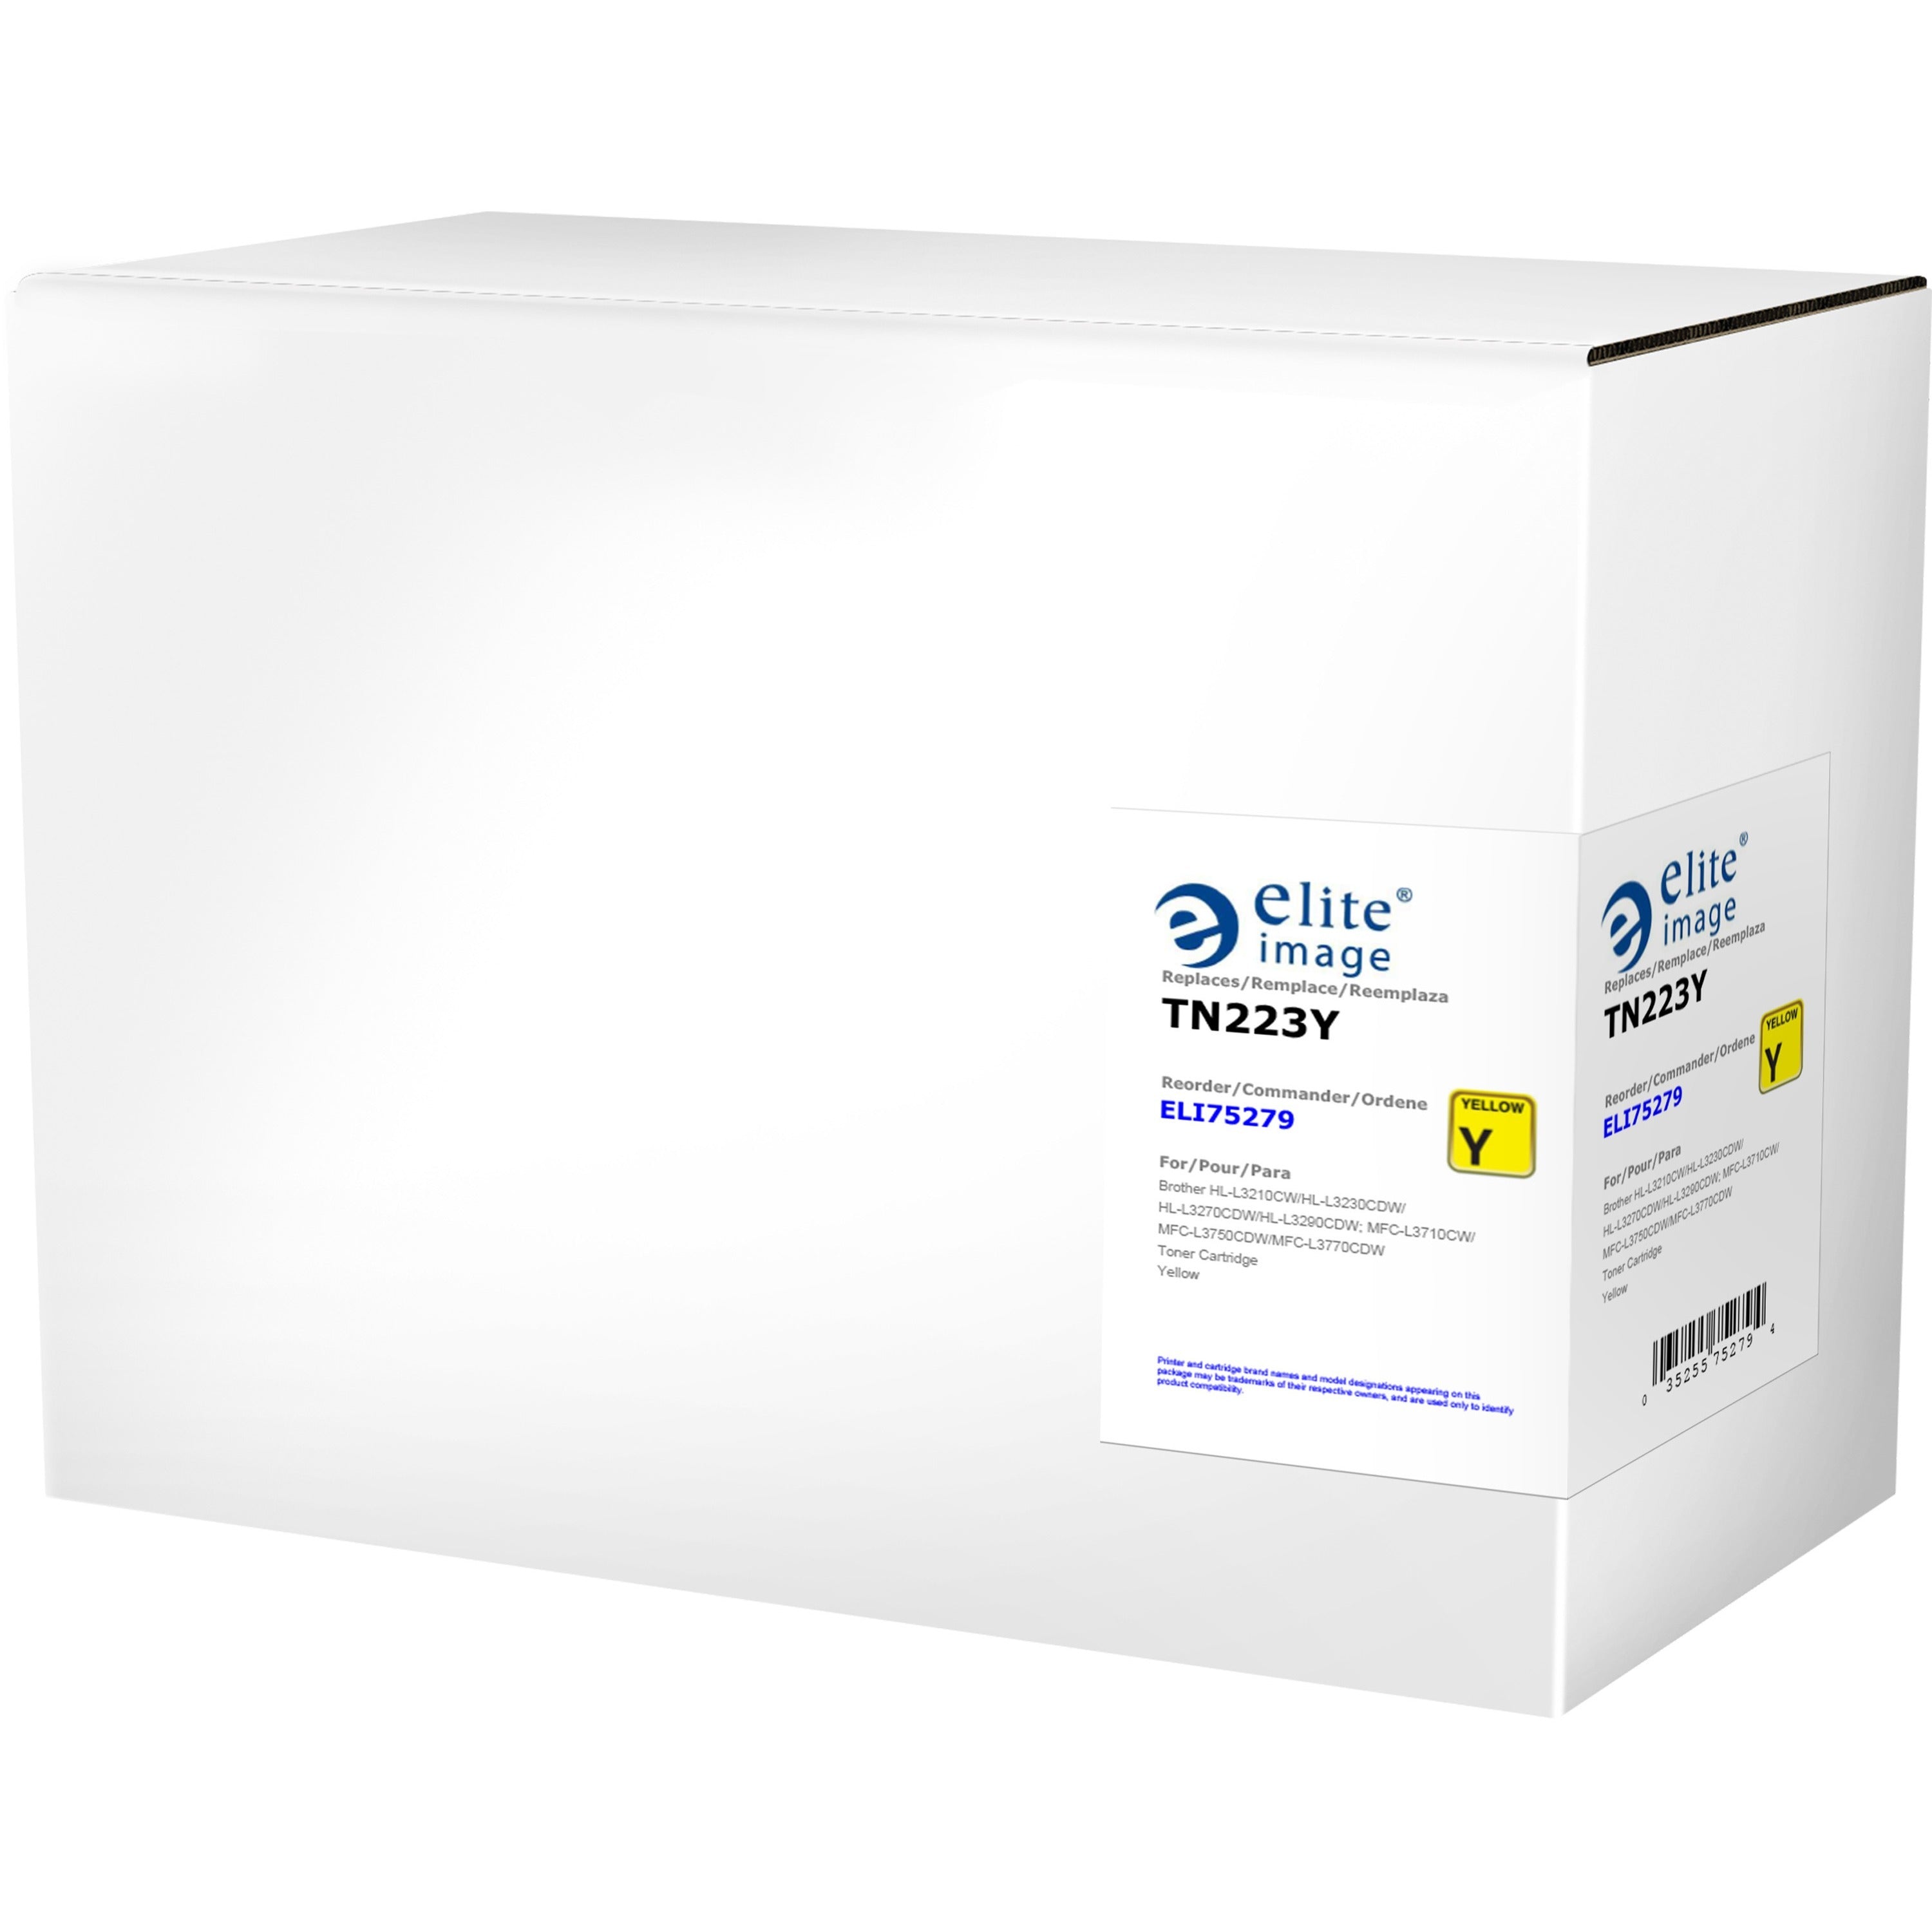 Elite Image Remanufactured Standard Yield Laser Toner Cartridge - Alternative for Brother TN223, TN227 - Yellow - 1 Each - 1300 Pages